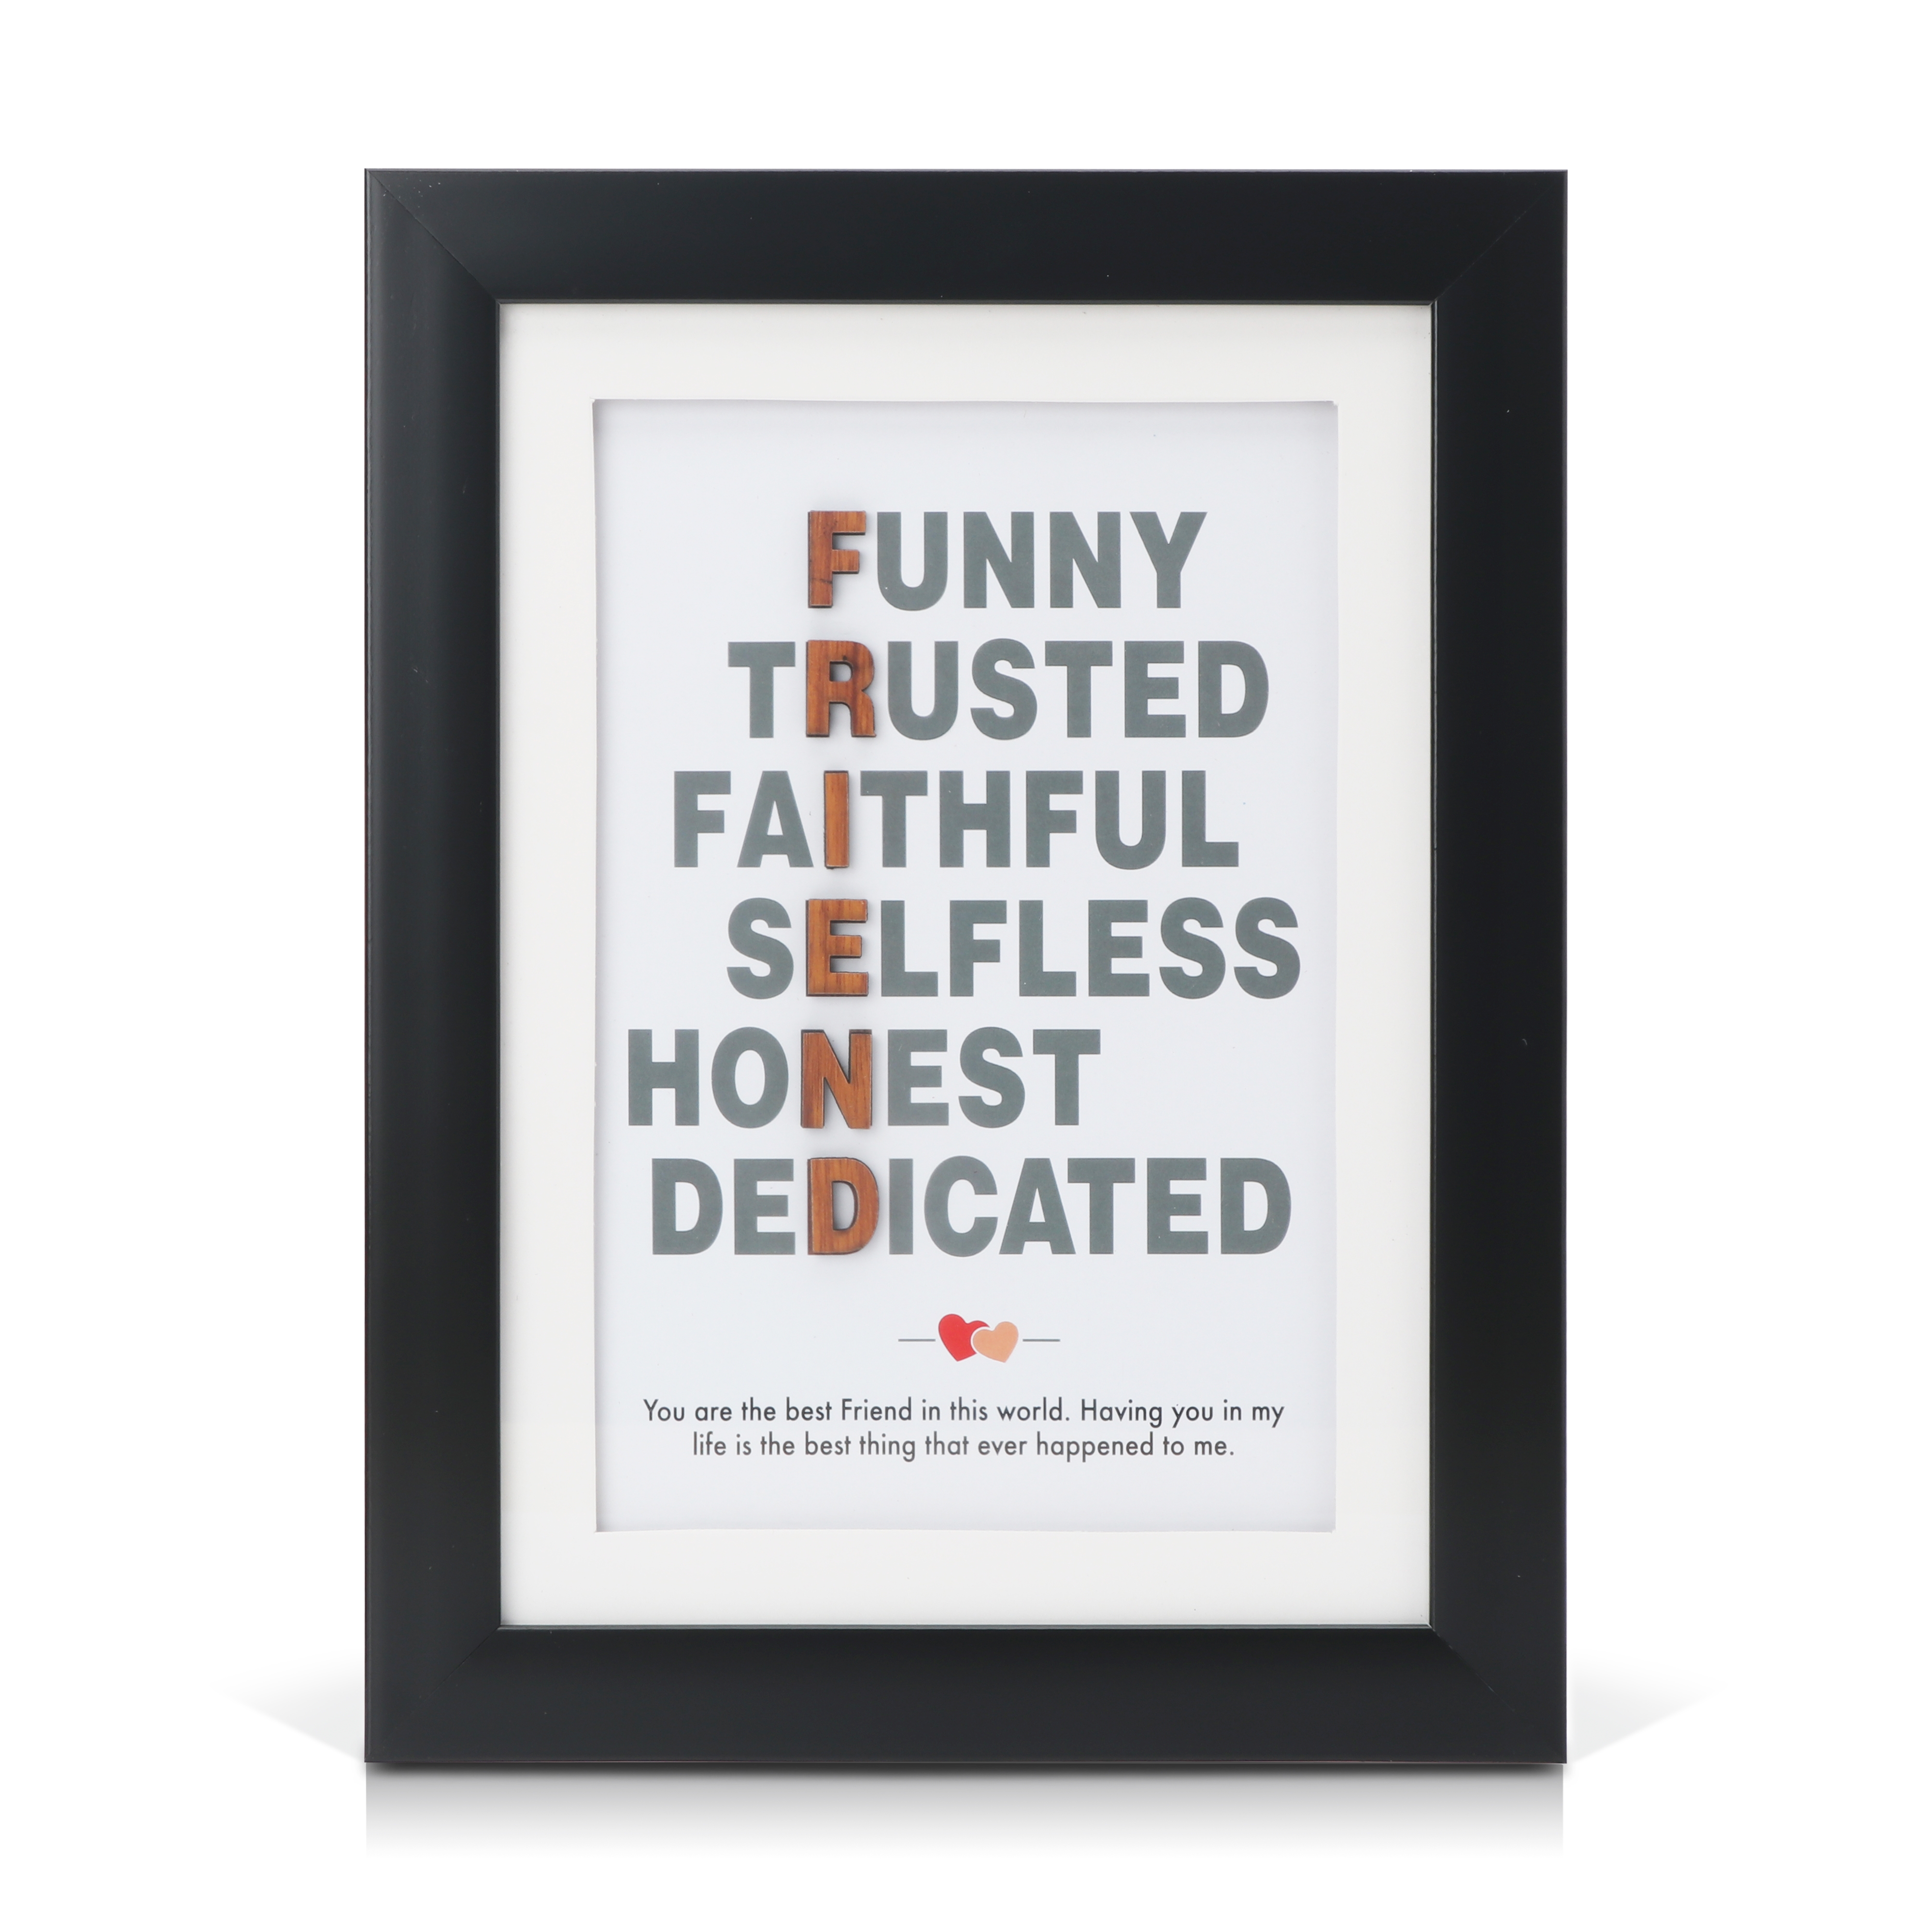 Archies Quotation Photo Frame with Greeting Card for Friend